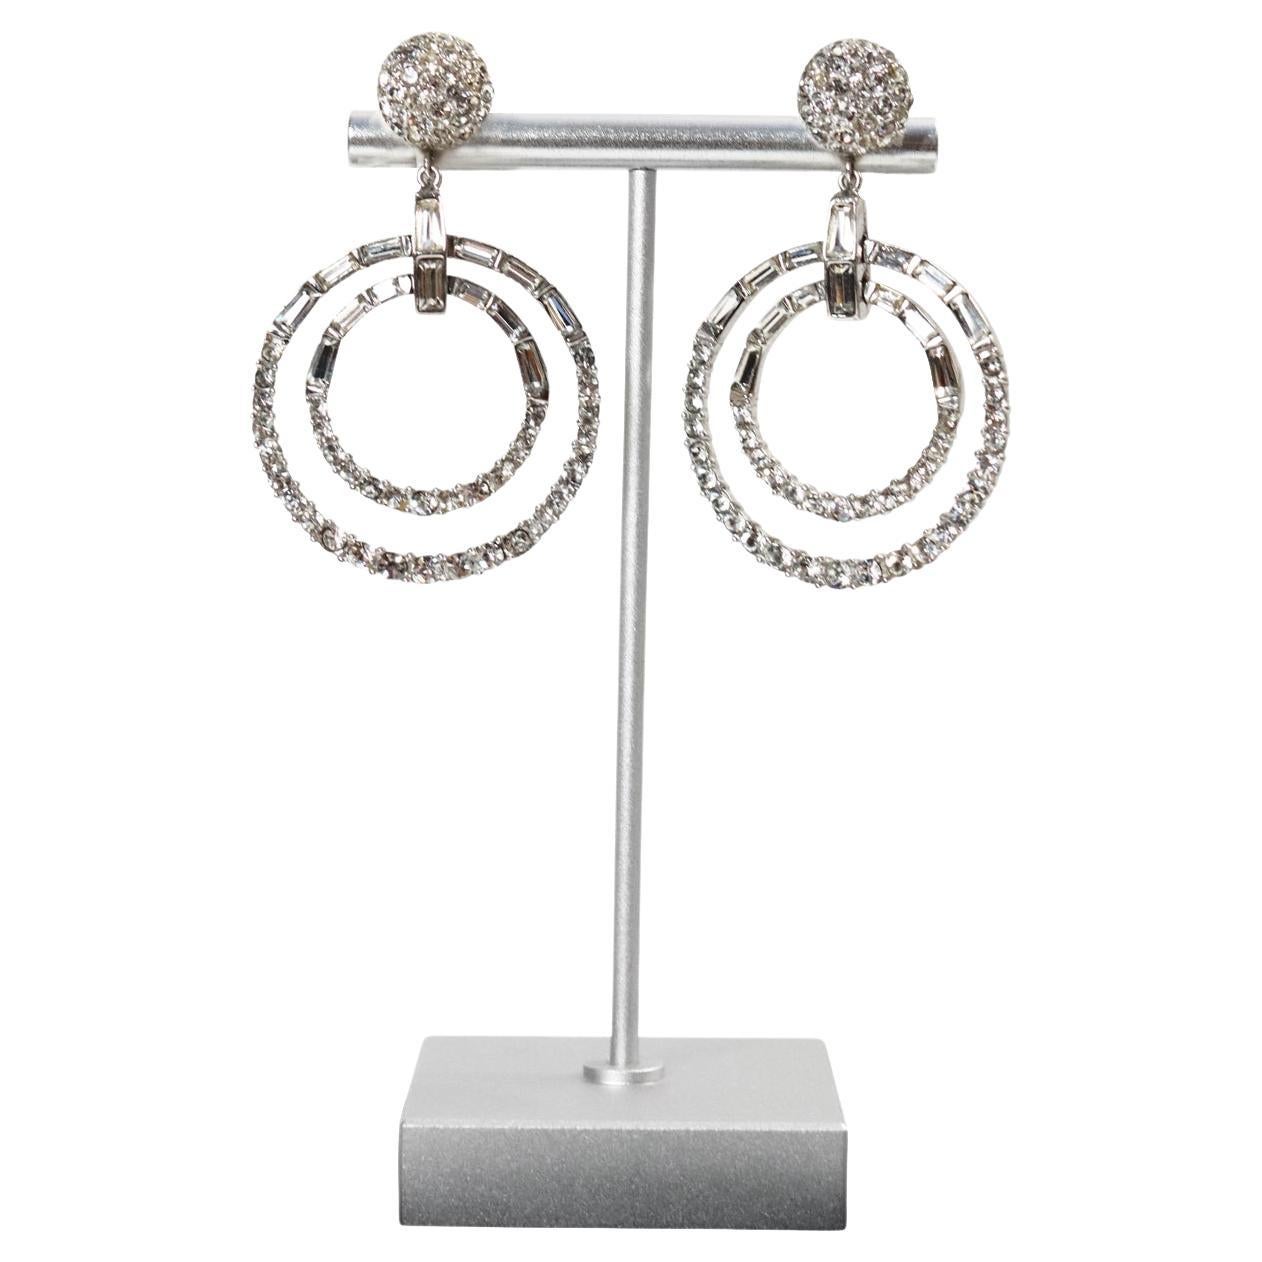 Vintage Boucher Double Hoop Earrings Circa 1960s.  These Double Hoop Earrings are made up of Pave and Baguette alternating parts.  They are Front facing and one is inside the other to create and even more interesting look.  These can go from day to